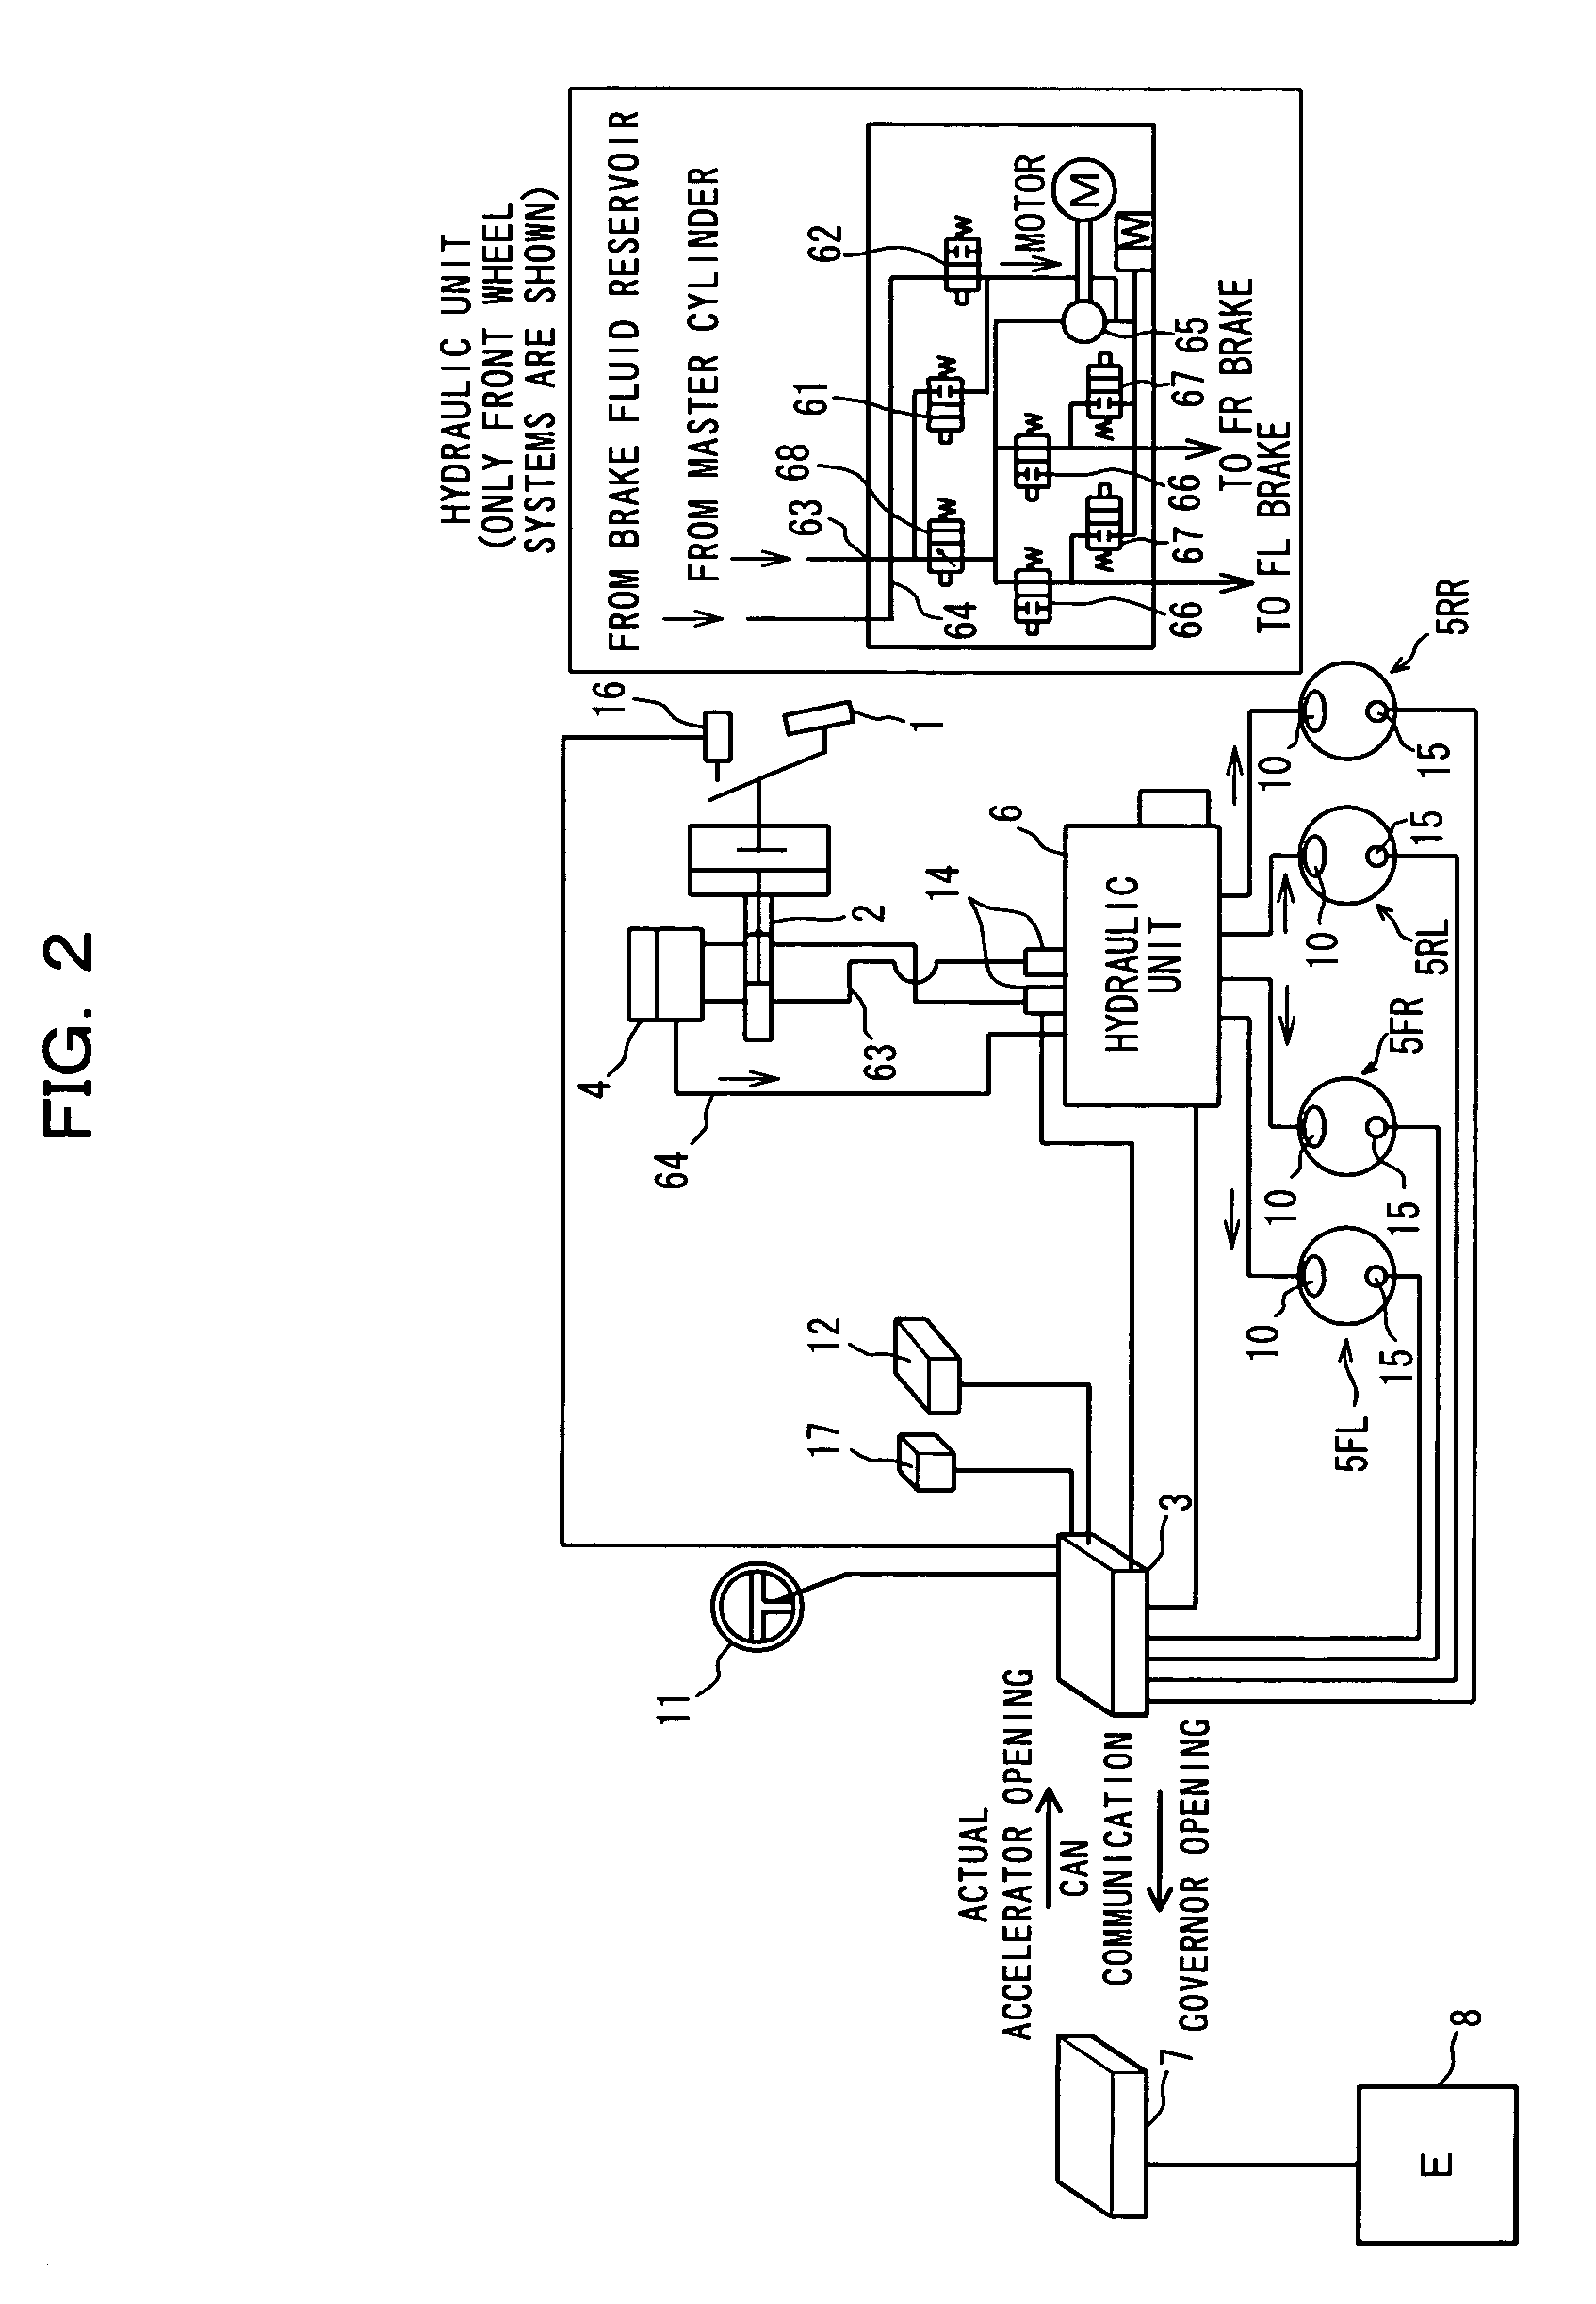 Automatic slowdown control apparatus for a vehicle